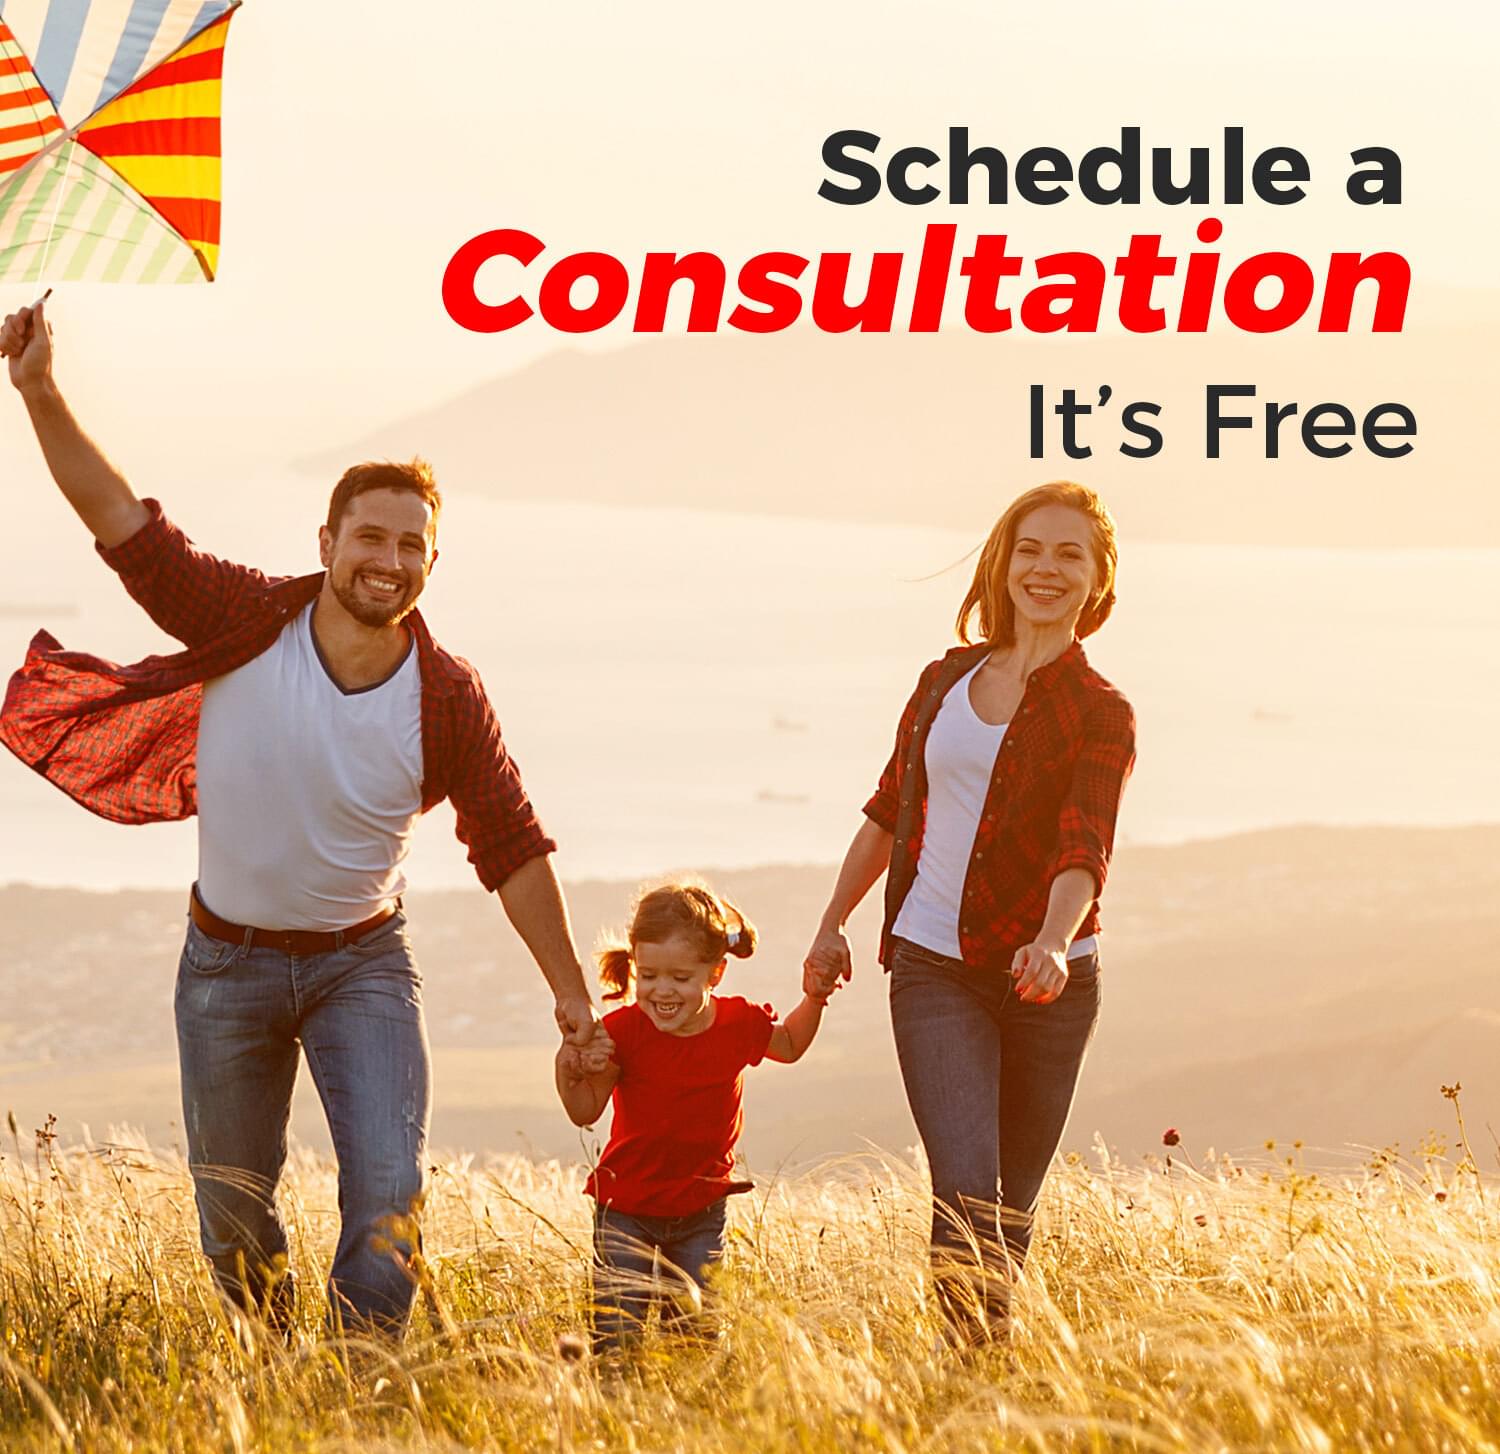 Schedule A Free Consultation